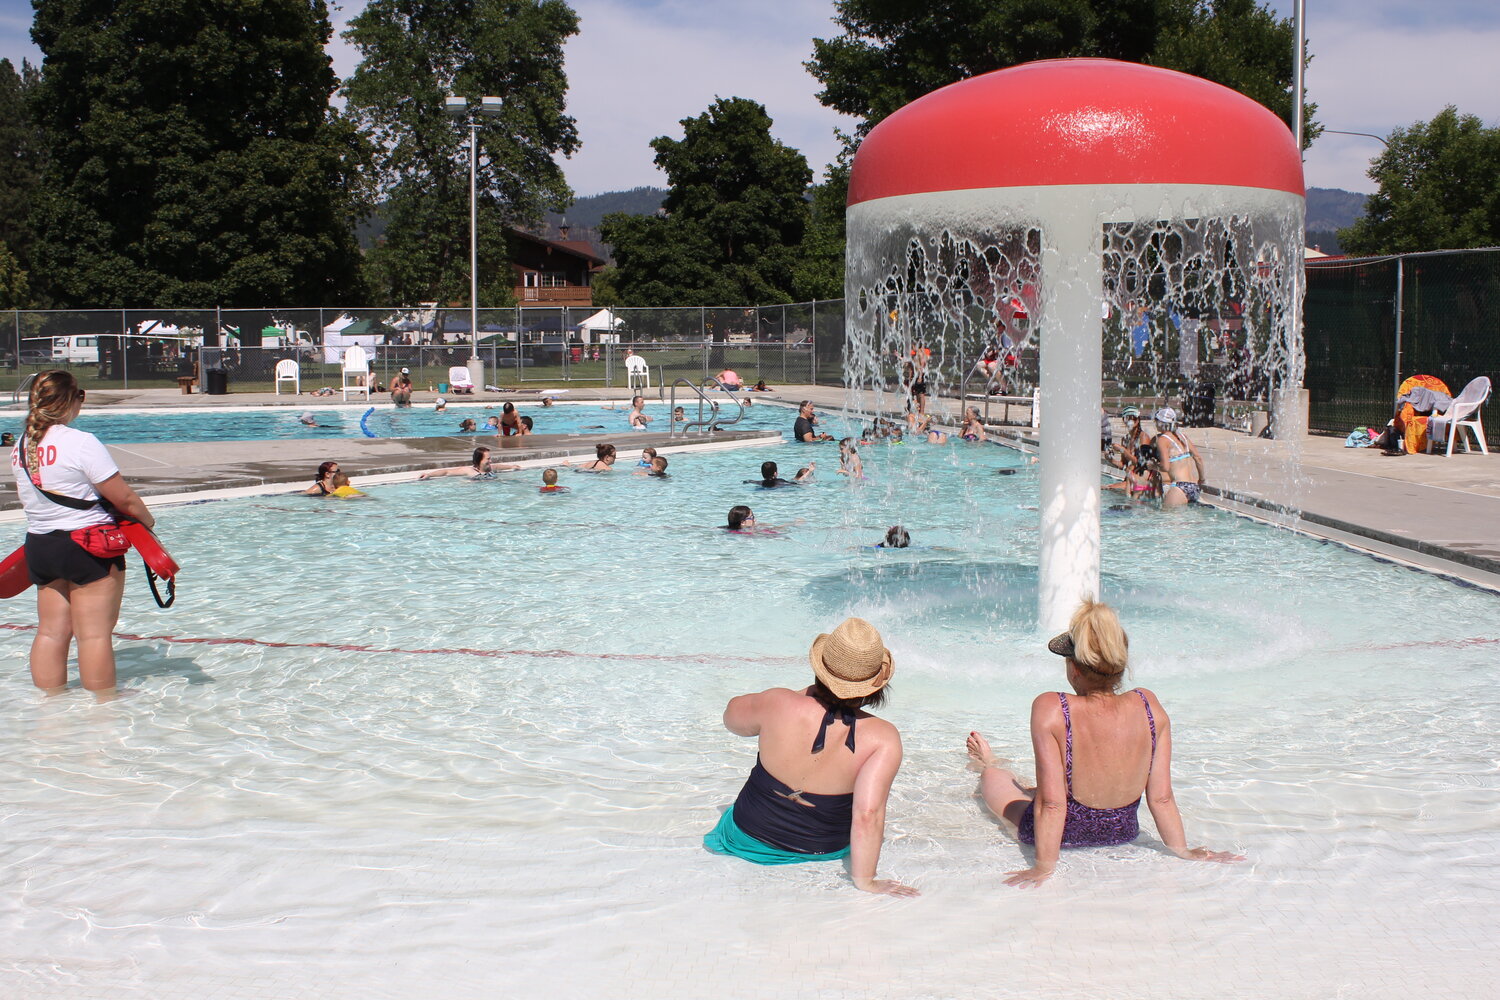 The Leavenworth city pool is a popular place on a warm summer day.